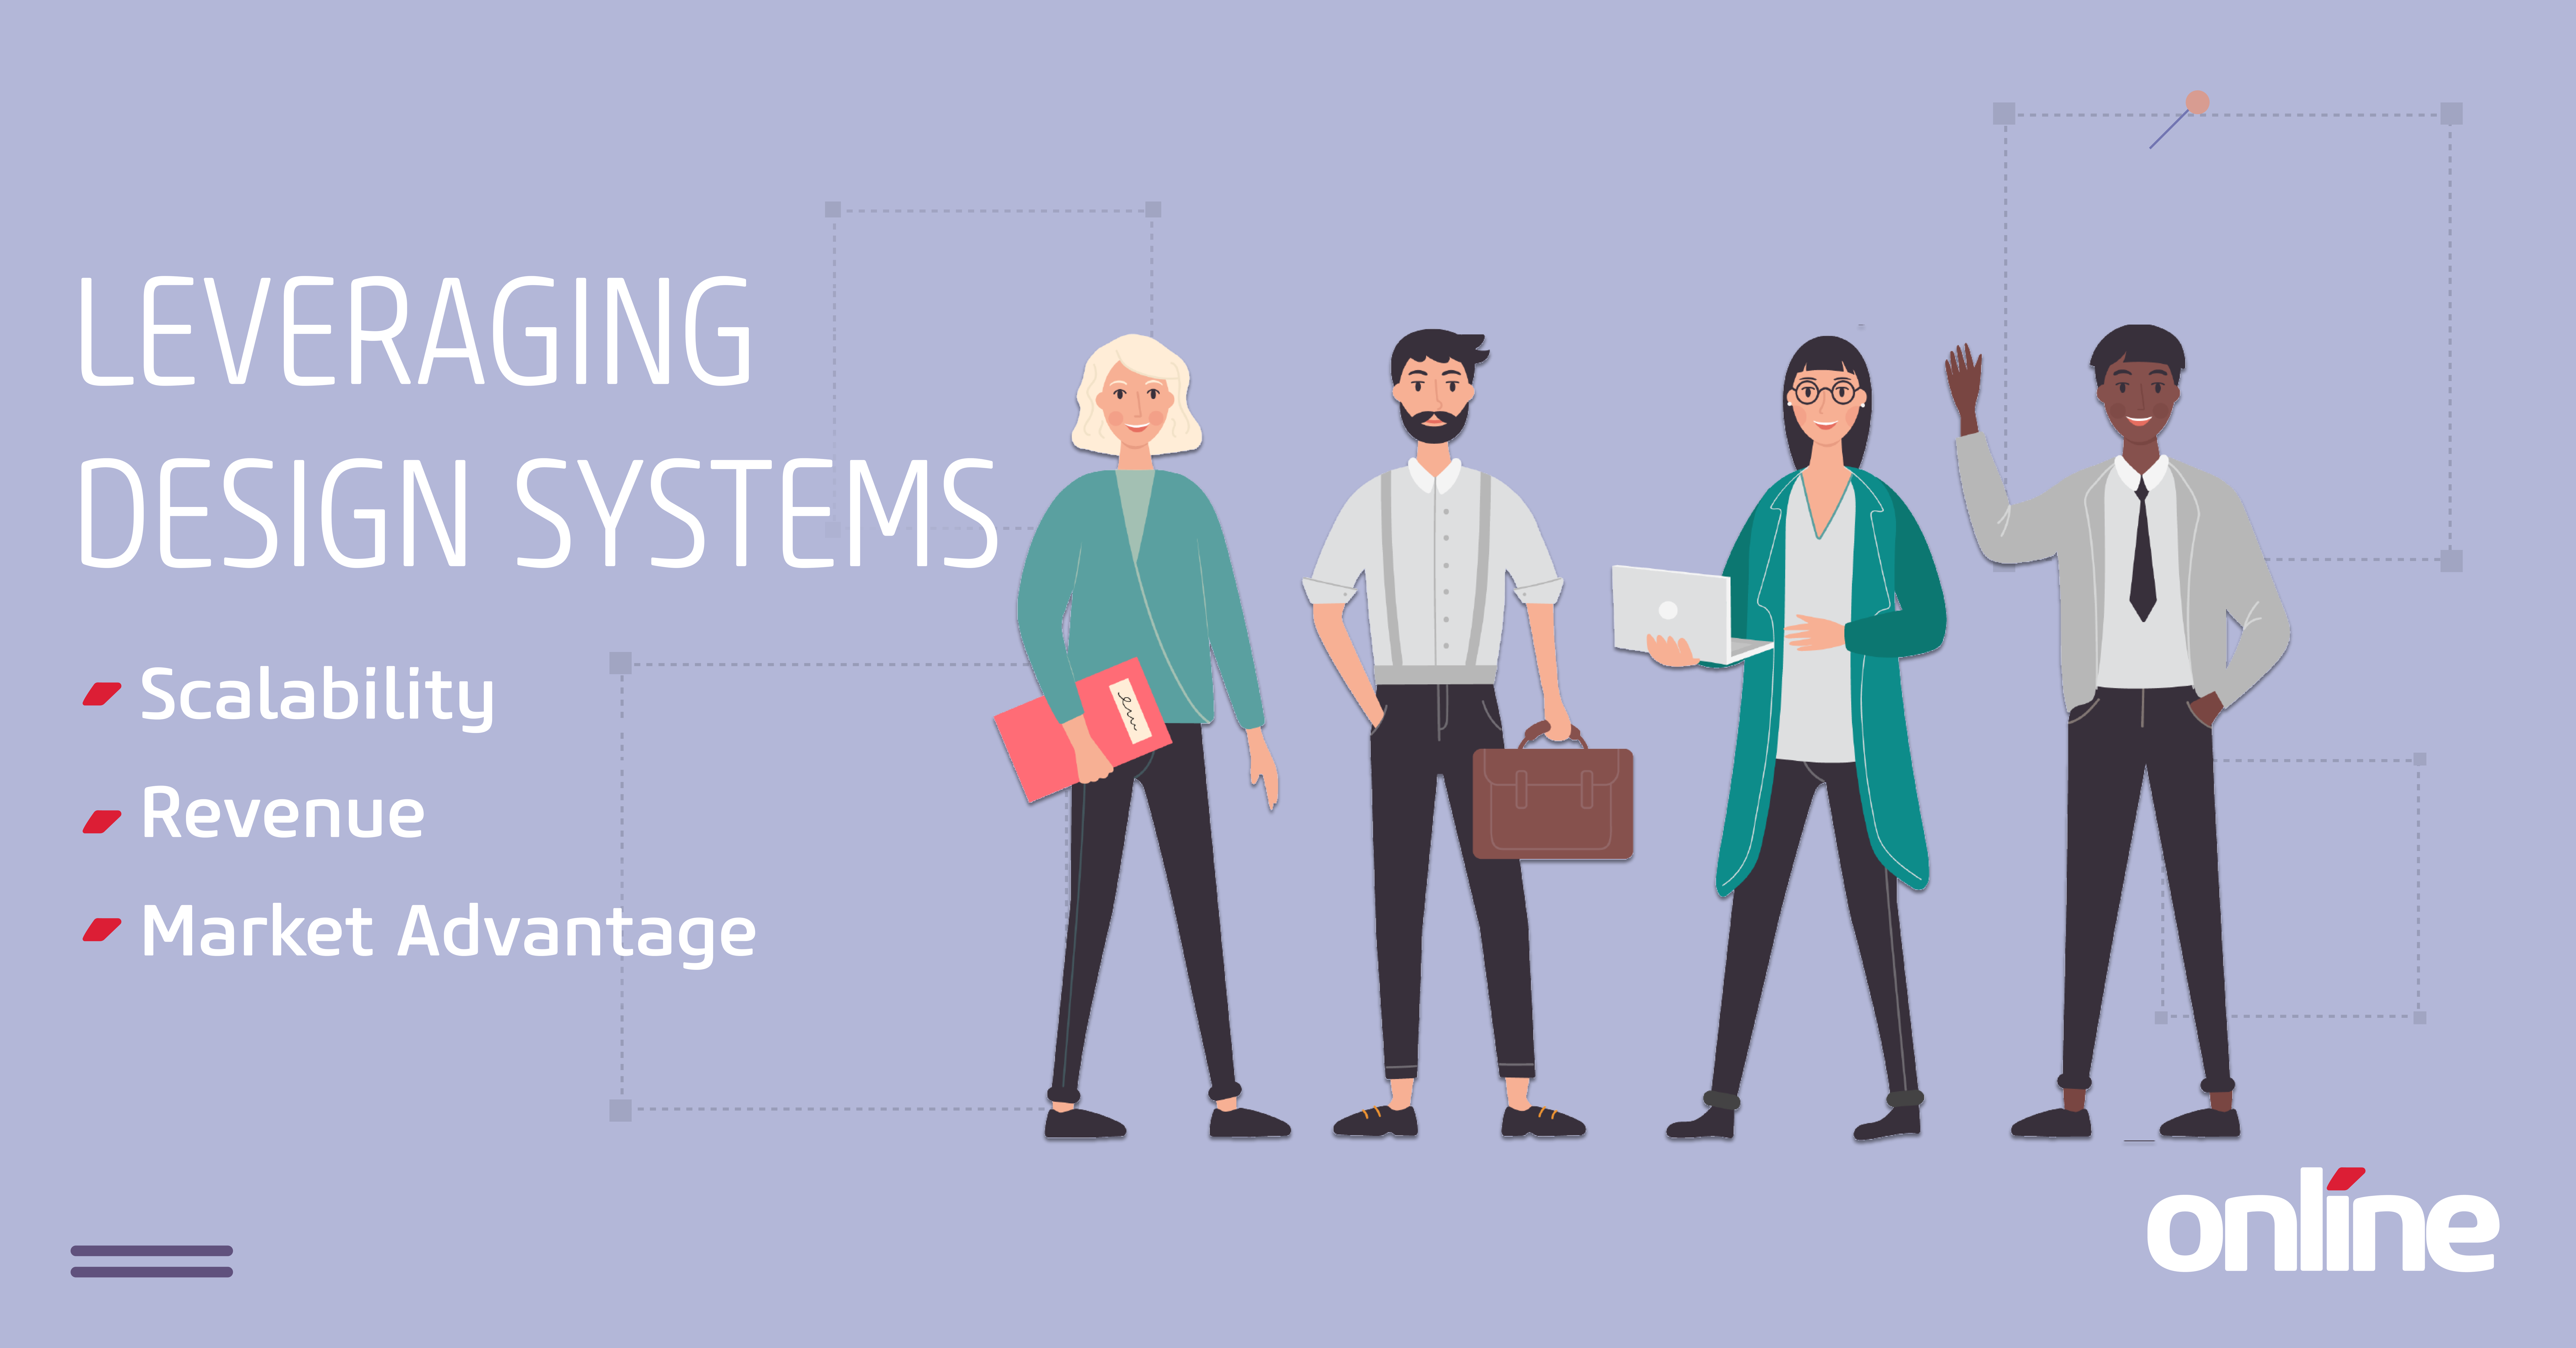 Leveraging Design Systems